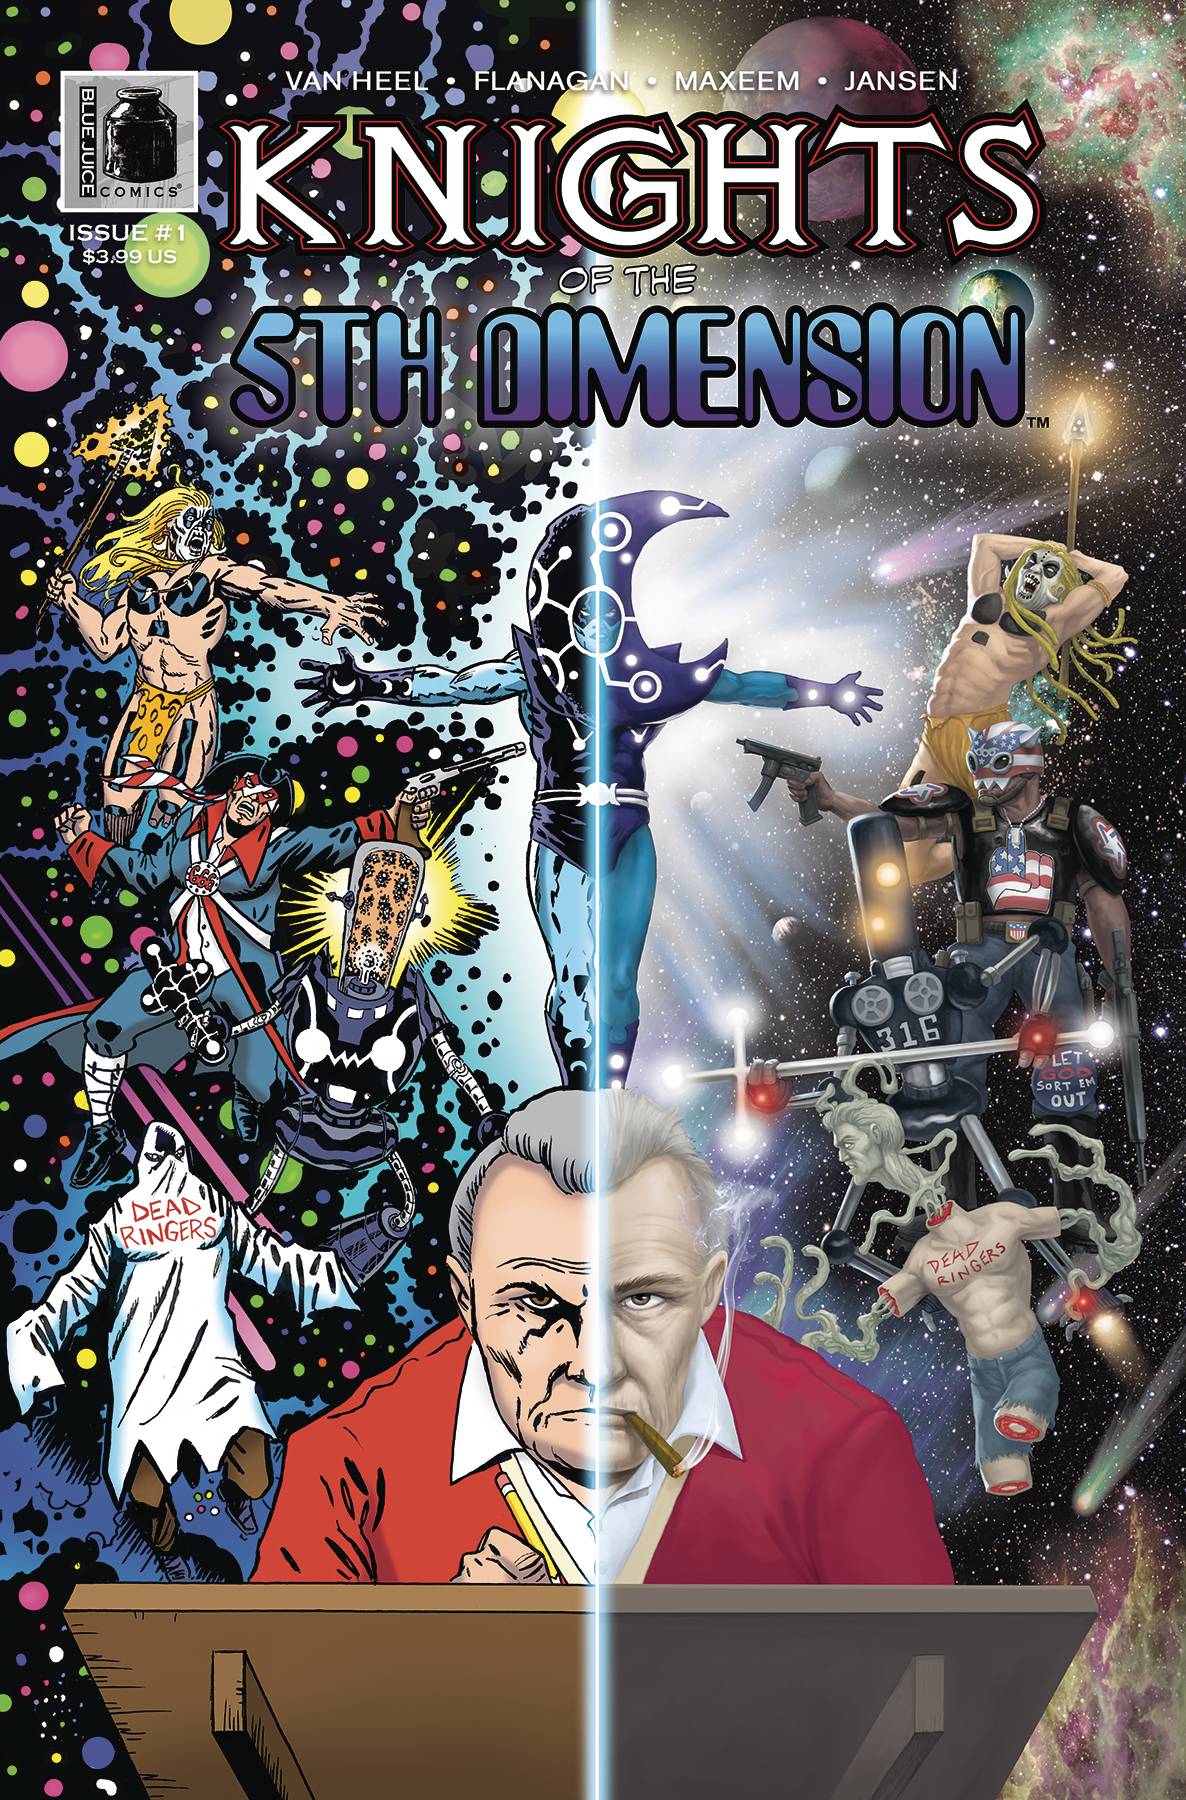 KNIGHTS OF THE FIFTH DIMENSION #1 (OF 4)